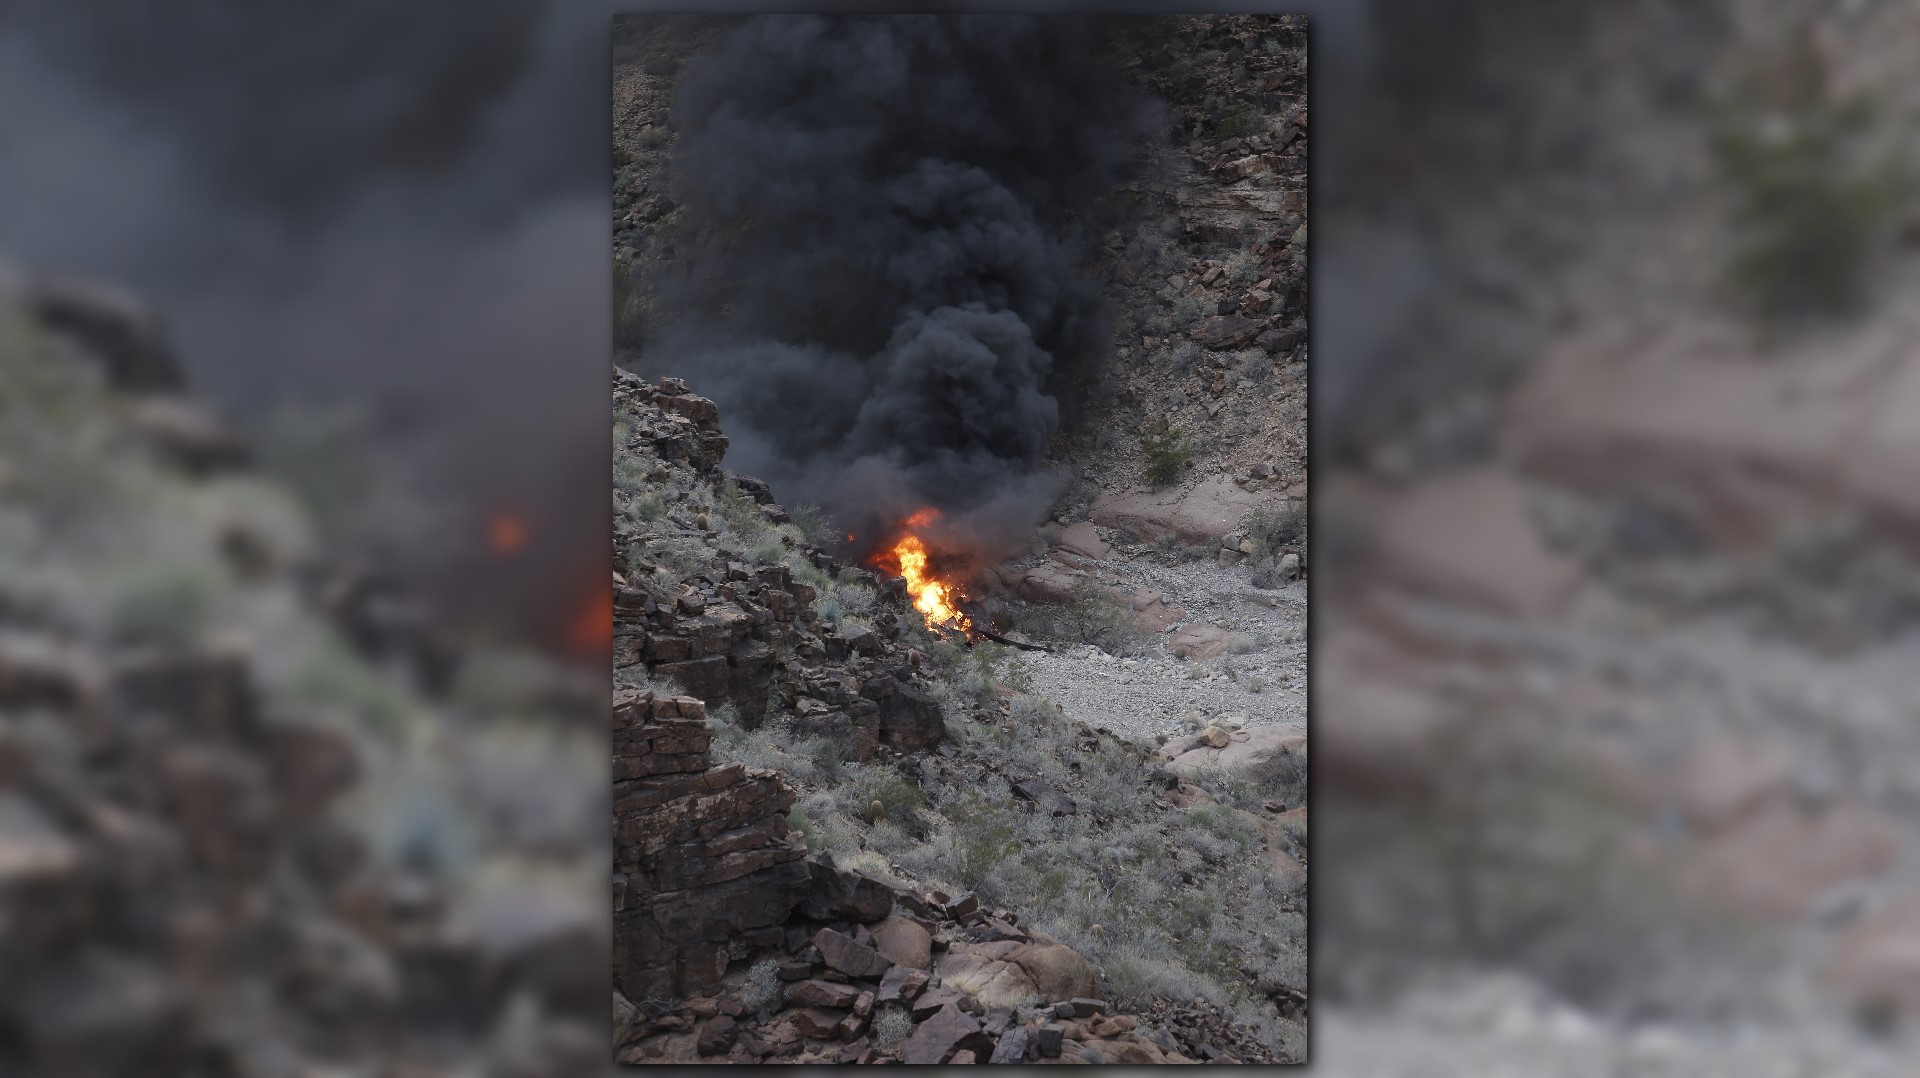 Grand Canyon helicopter crash victim dies, 3 others critical